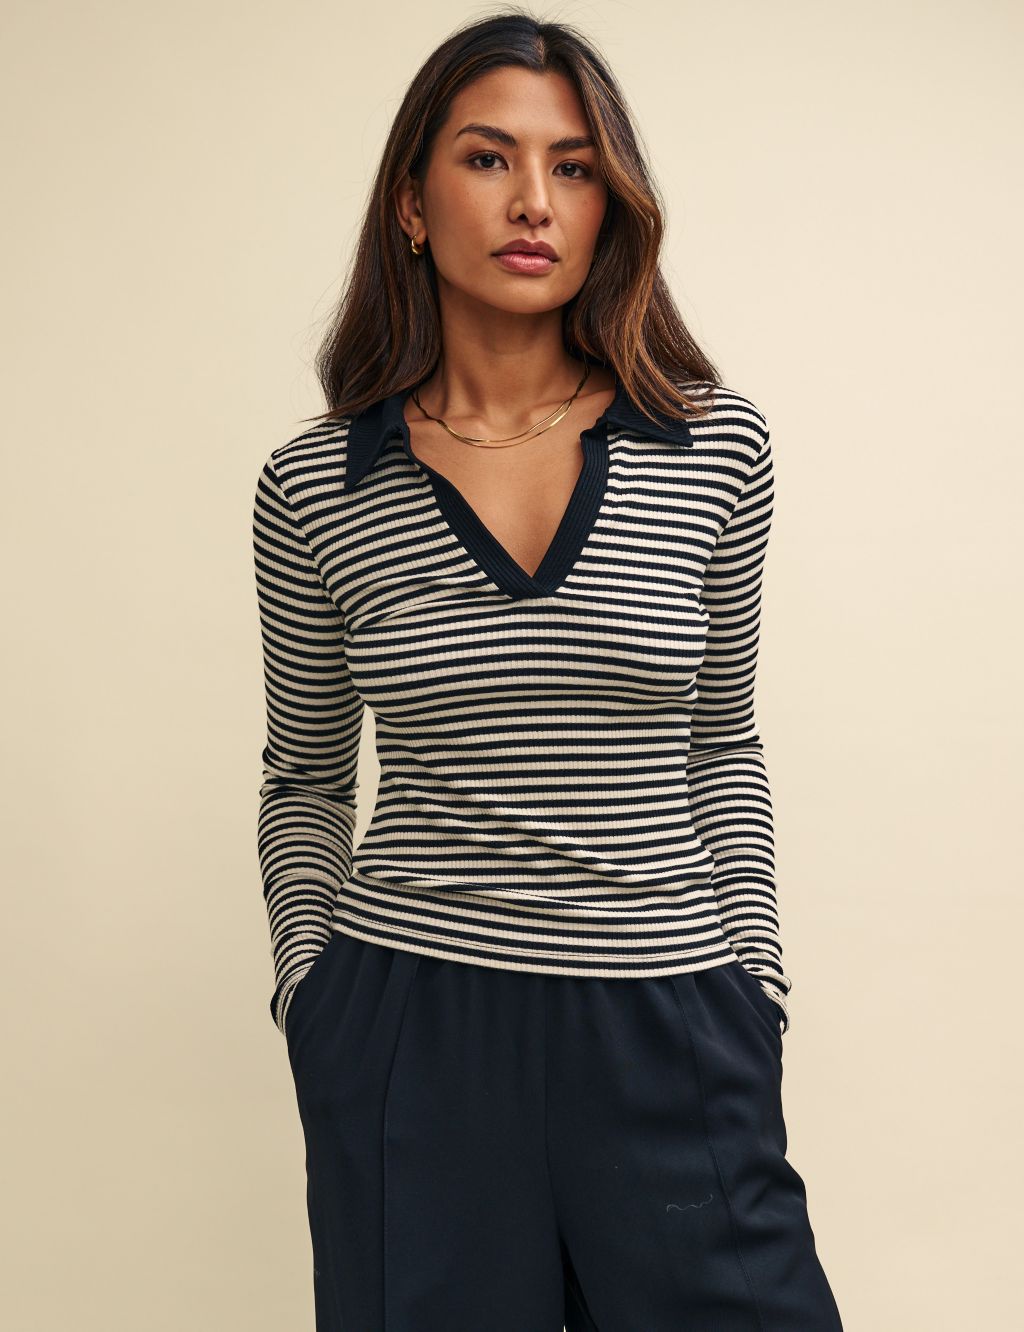 Striped Top image 4